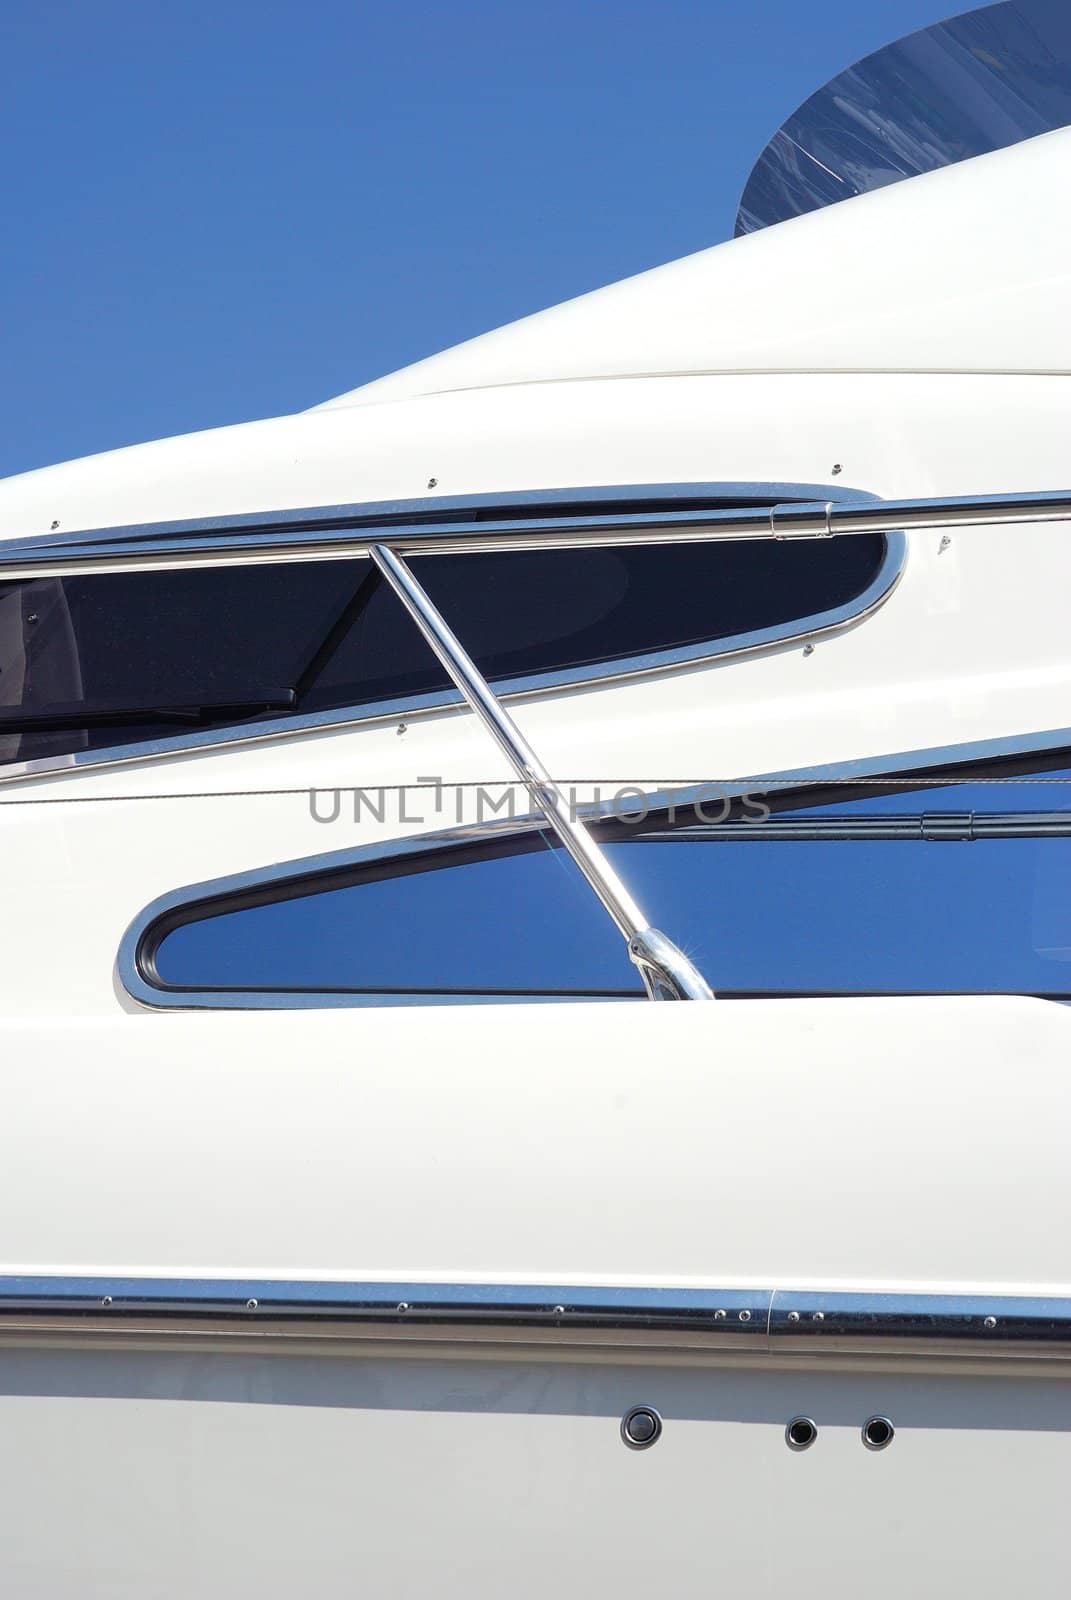 white detail from a yacht deck. marine colors